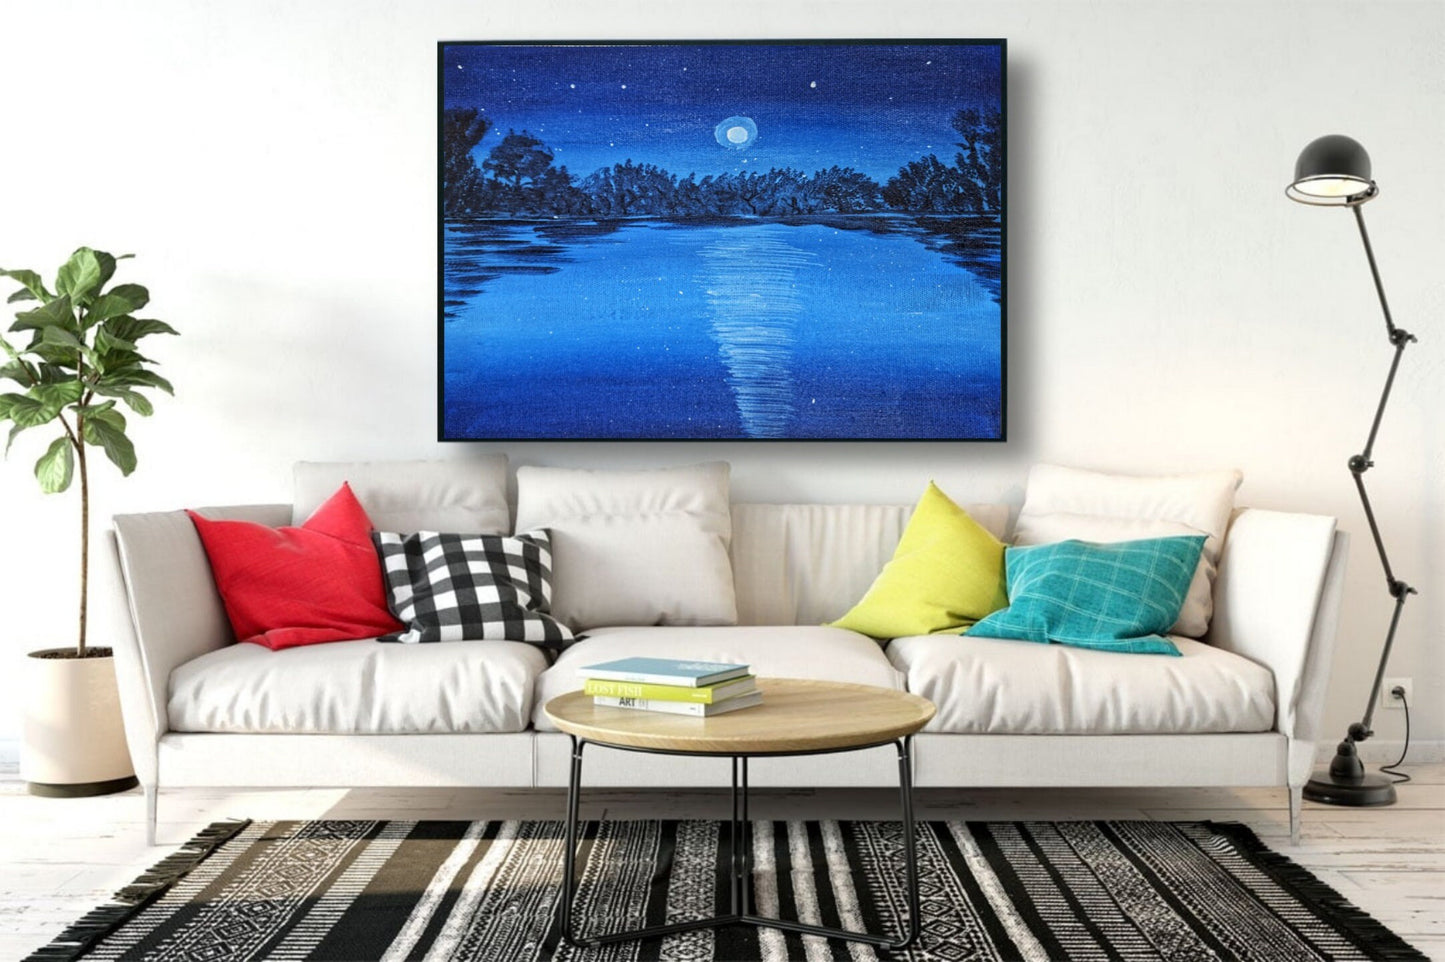 Moonlight Captivating Handmade Painting Moonlight Reflections on Water for home and decor - wall art 10 x 12 inches Unframed